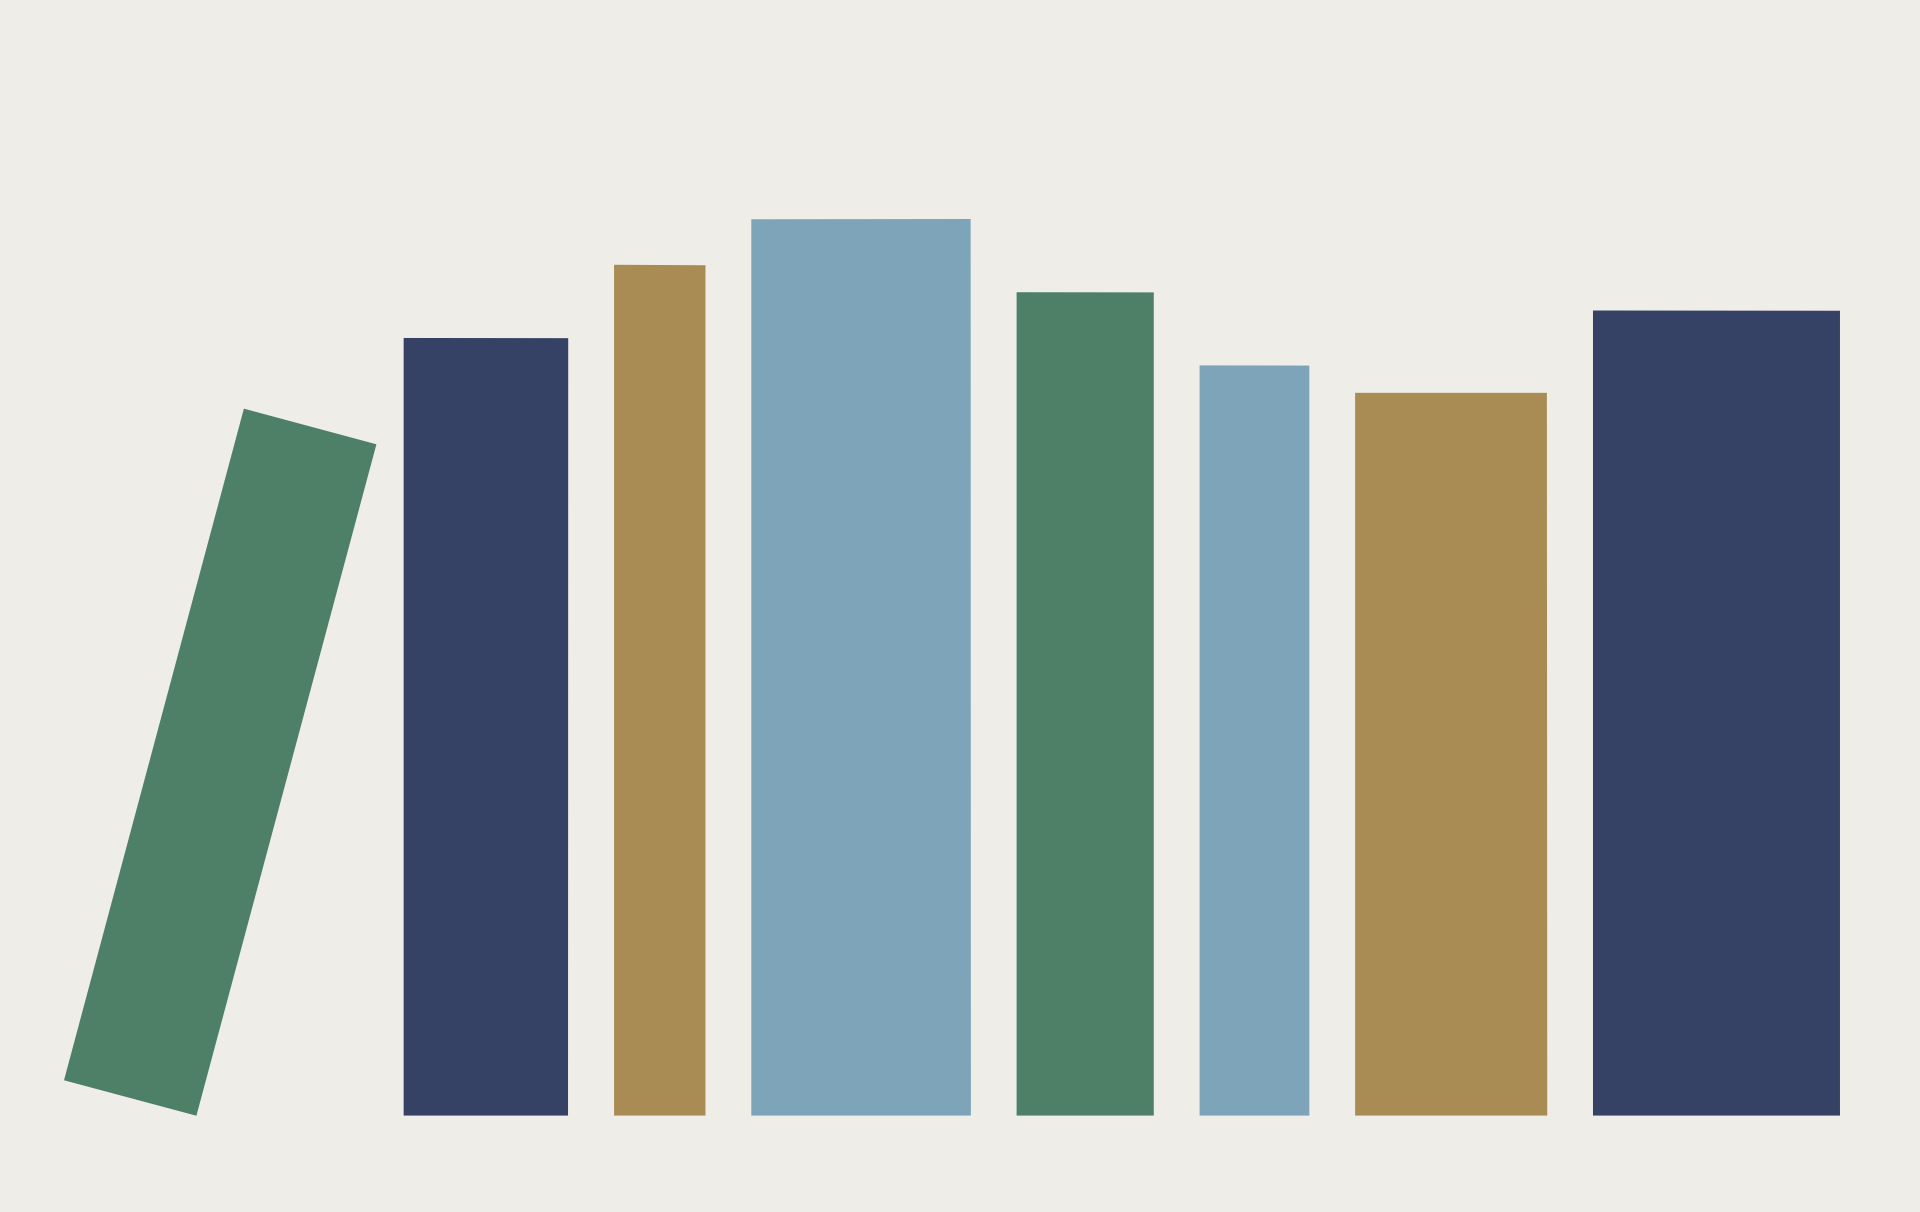 Clickable graphic that resembles books on a bookshelf